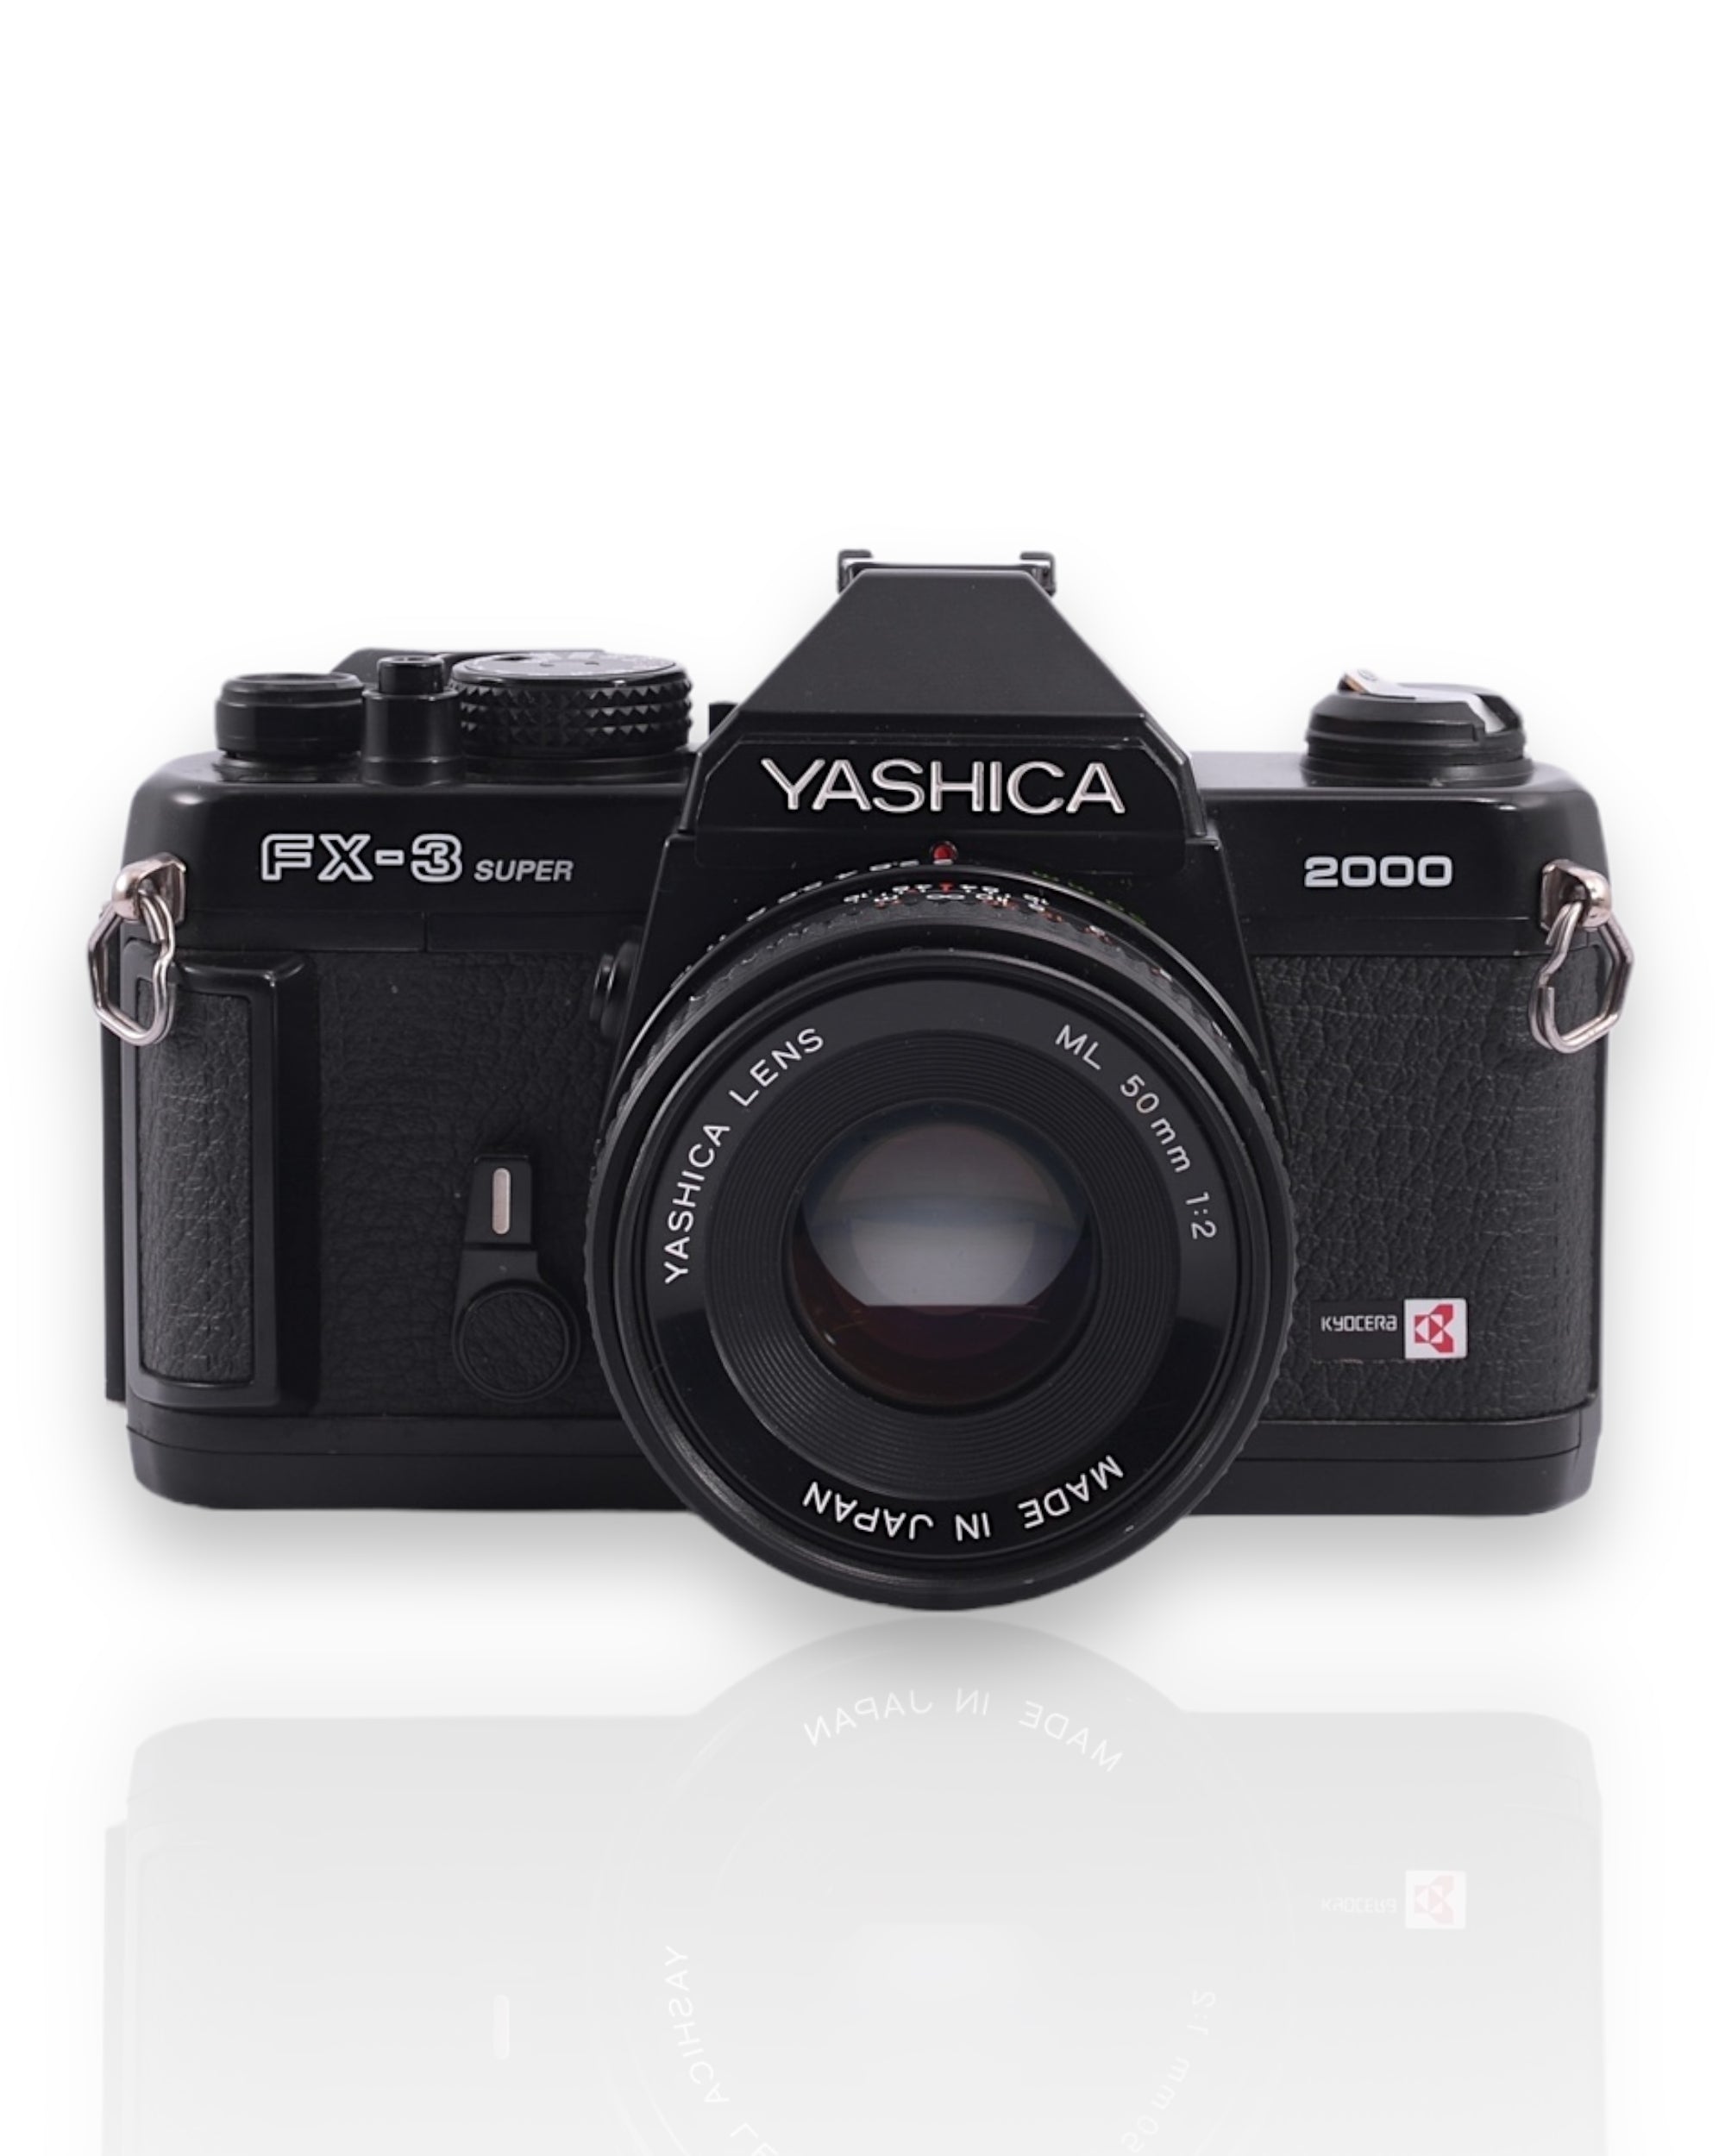 Yashica FX-3 Super 2000 35mm SLR film camera with 50mm f2